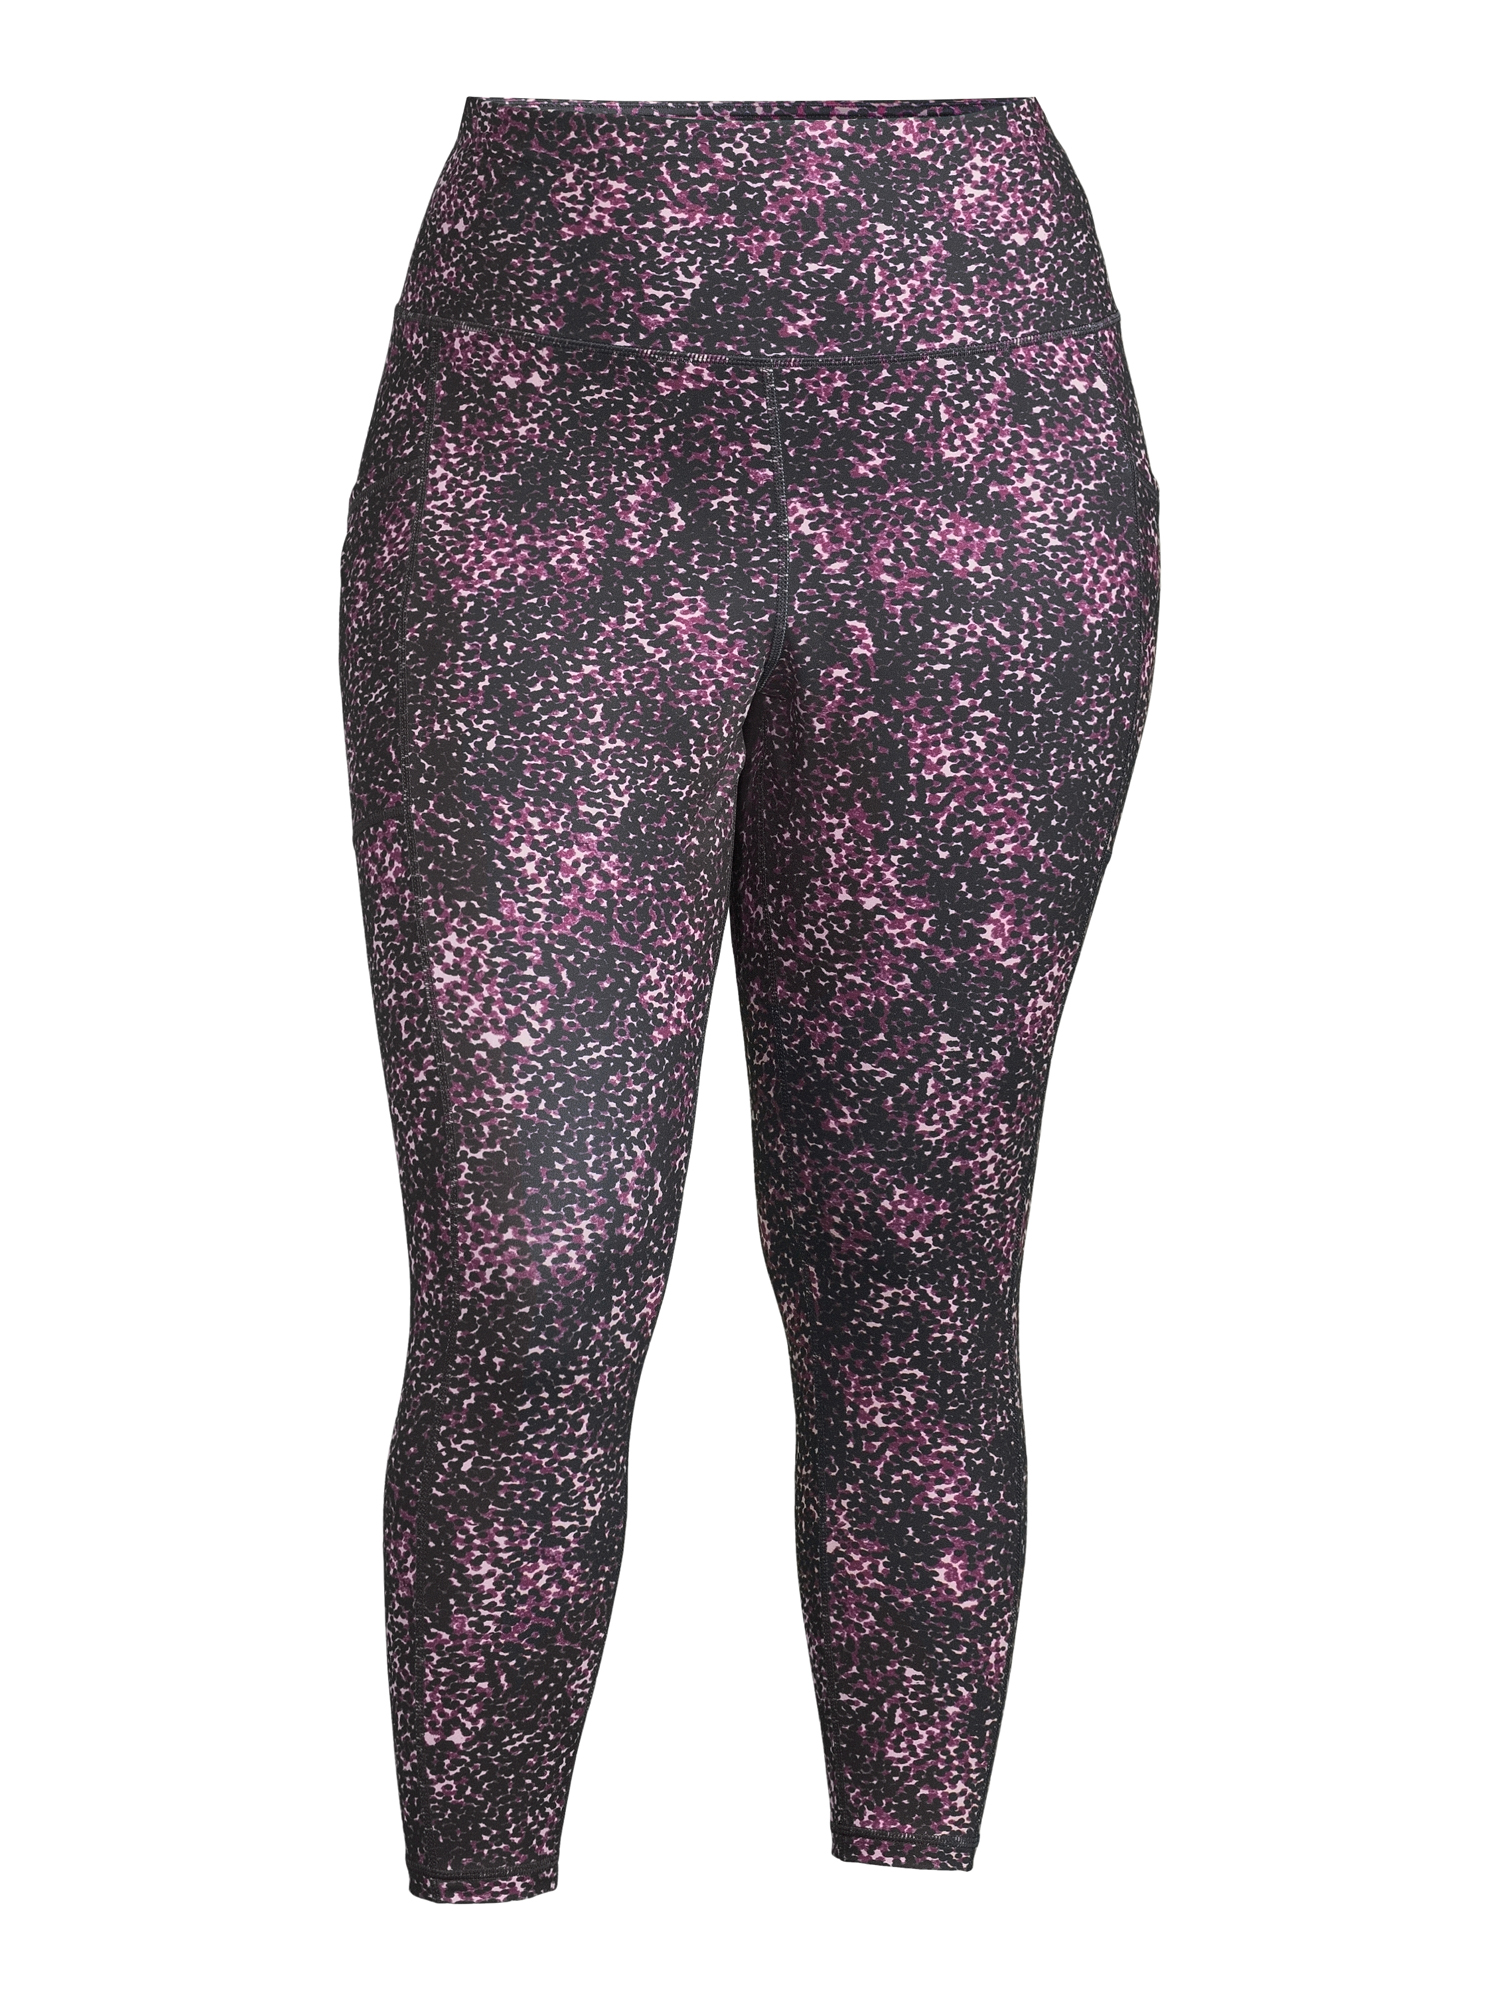 Reebok Women's Plus Size High-Waisted Athletic Leggings with Side Pockets - image 3 of 5